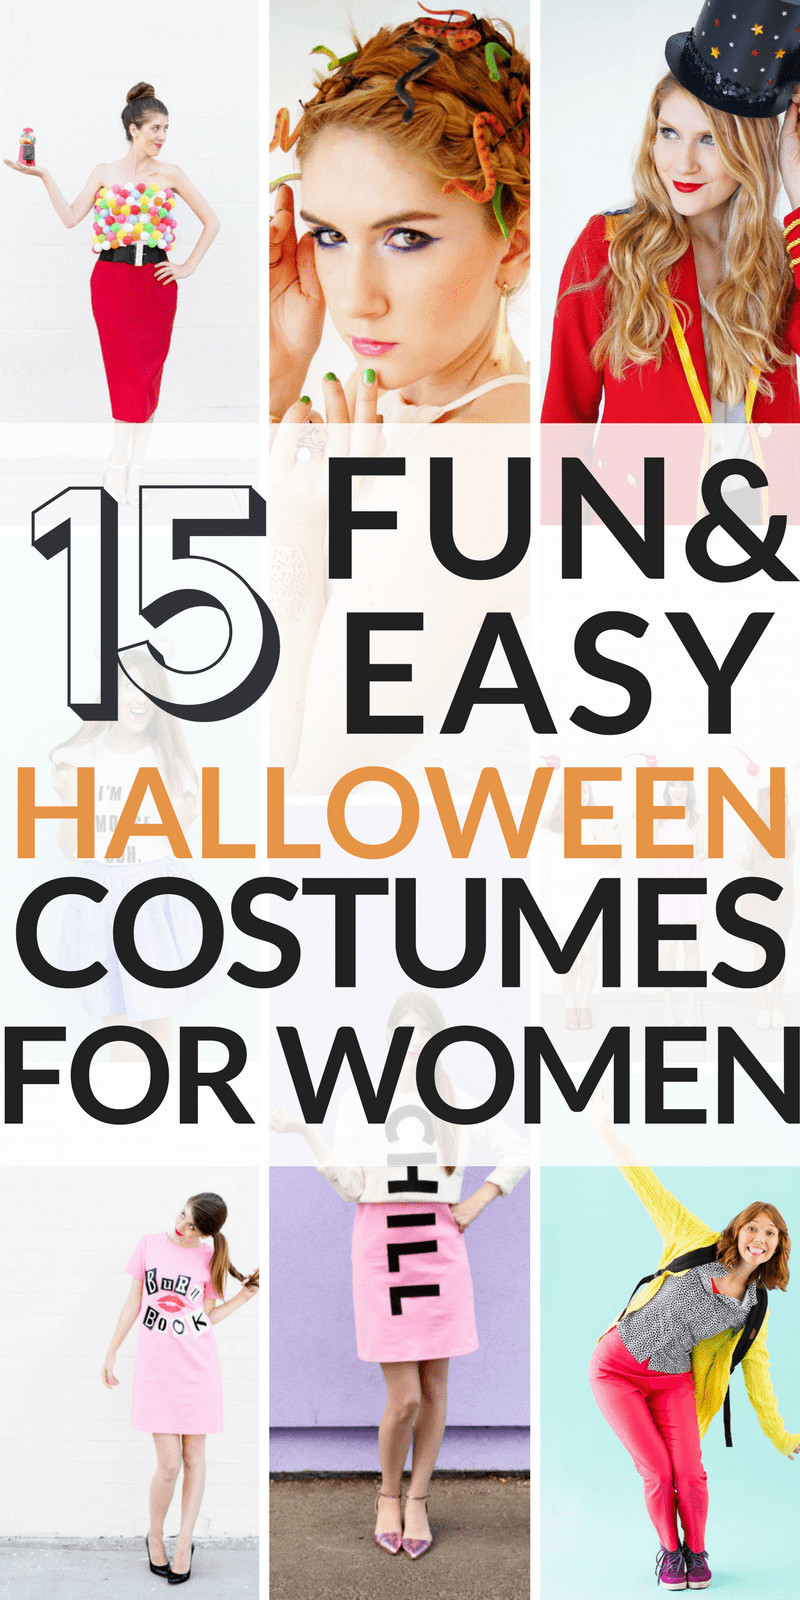 Simple DIY Halloween Costumes For Adults
 15 Cheap and Easy DIY Halloween Costumes for Women